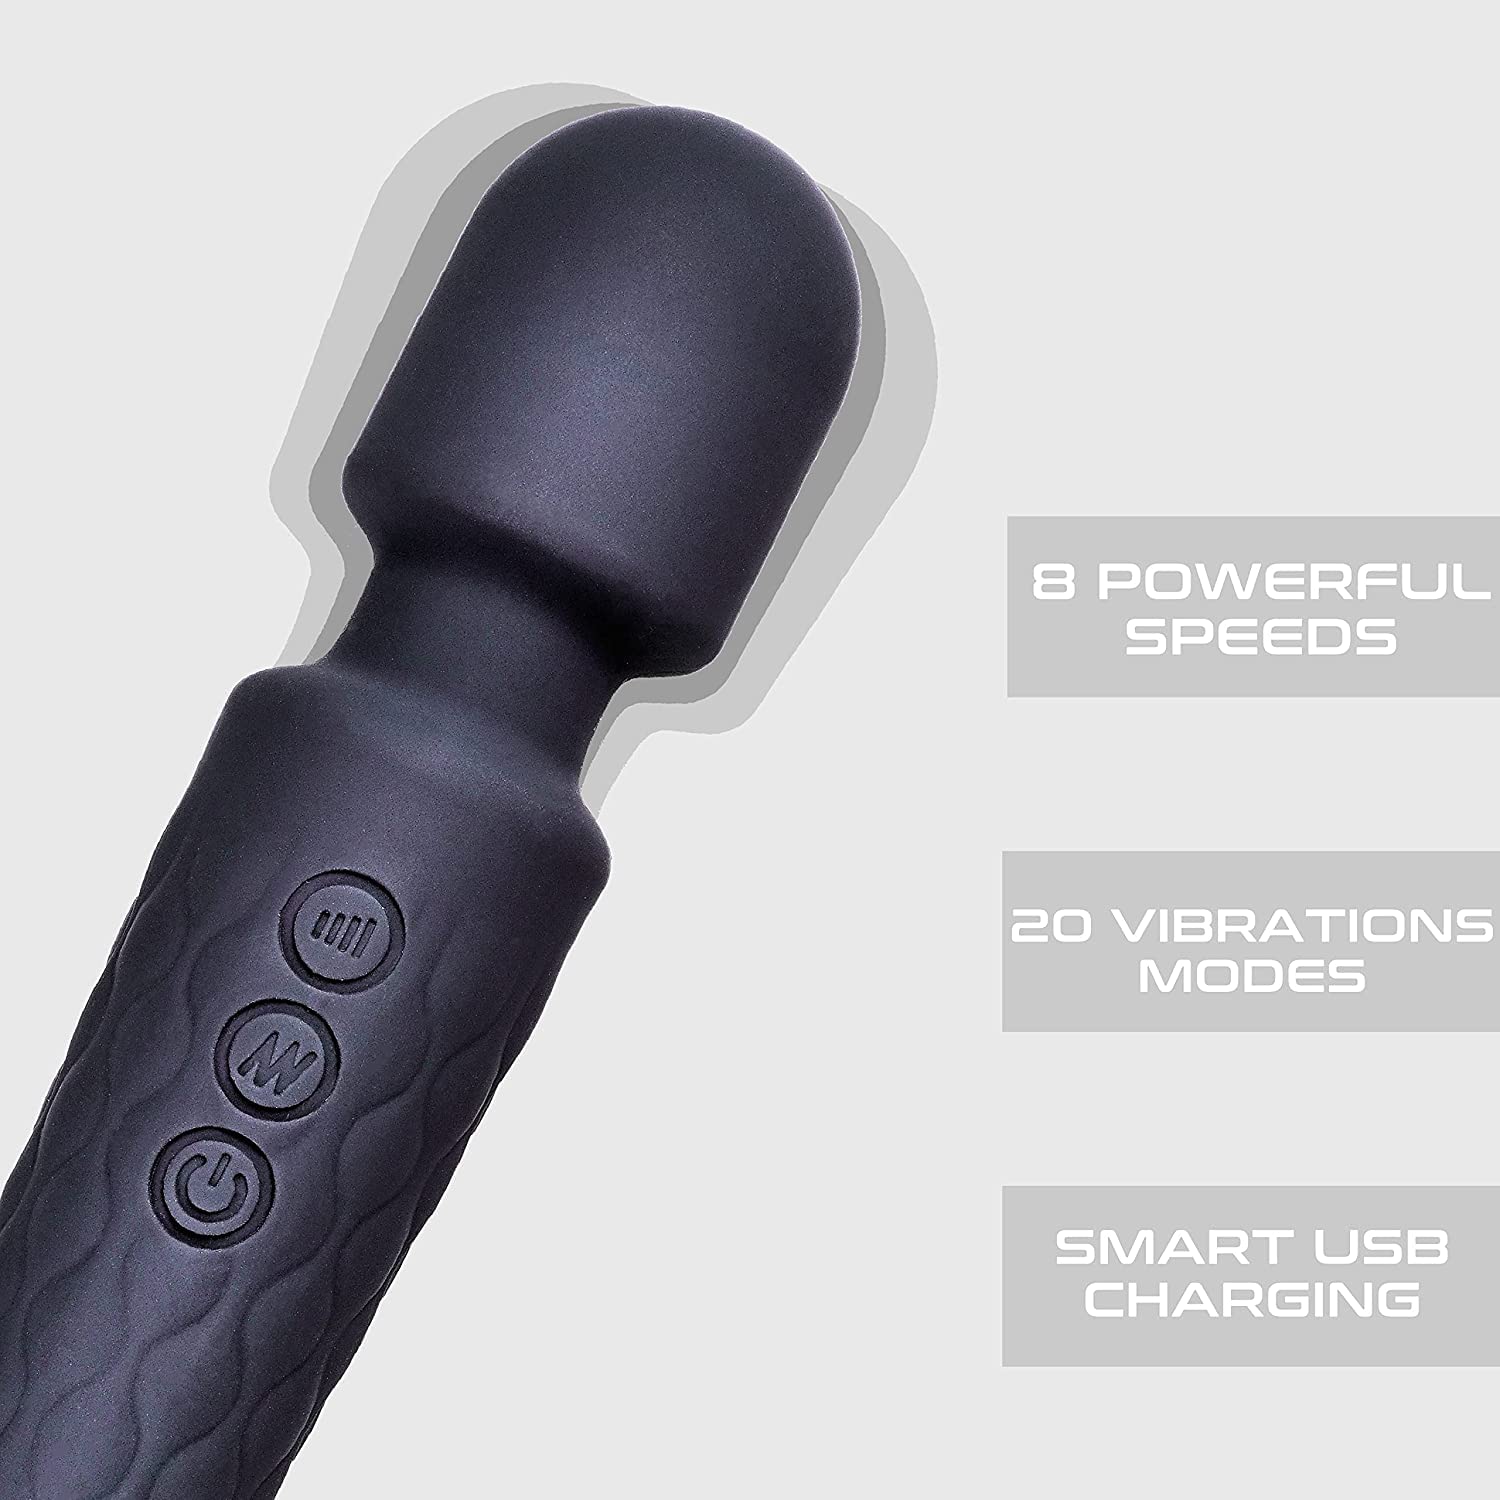 Dr. Sanaya Massager Rechargeable Body Massager for Women and Men / Handheld Waterproof Vibrate Wand Massage Machine with 20 Vibration Modes - 8 Speeds, Battery Powered, Full Body Massager Multicolor…